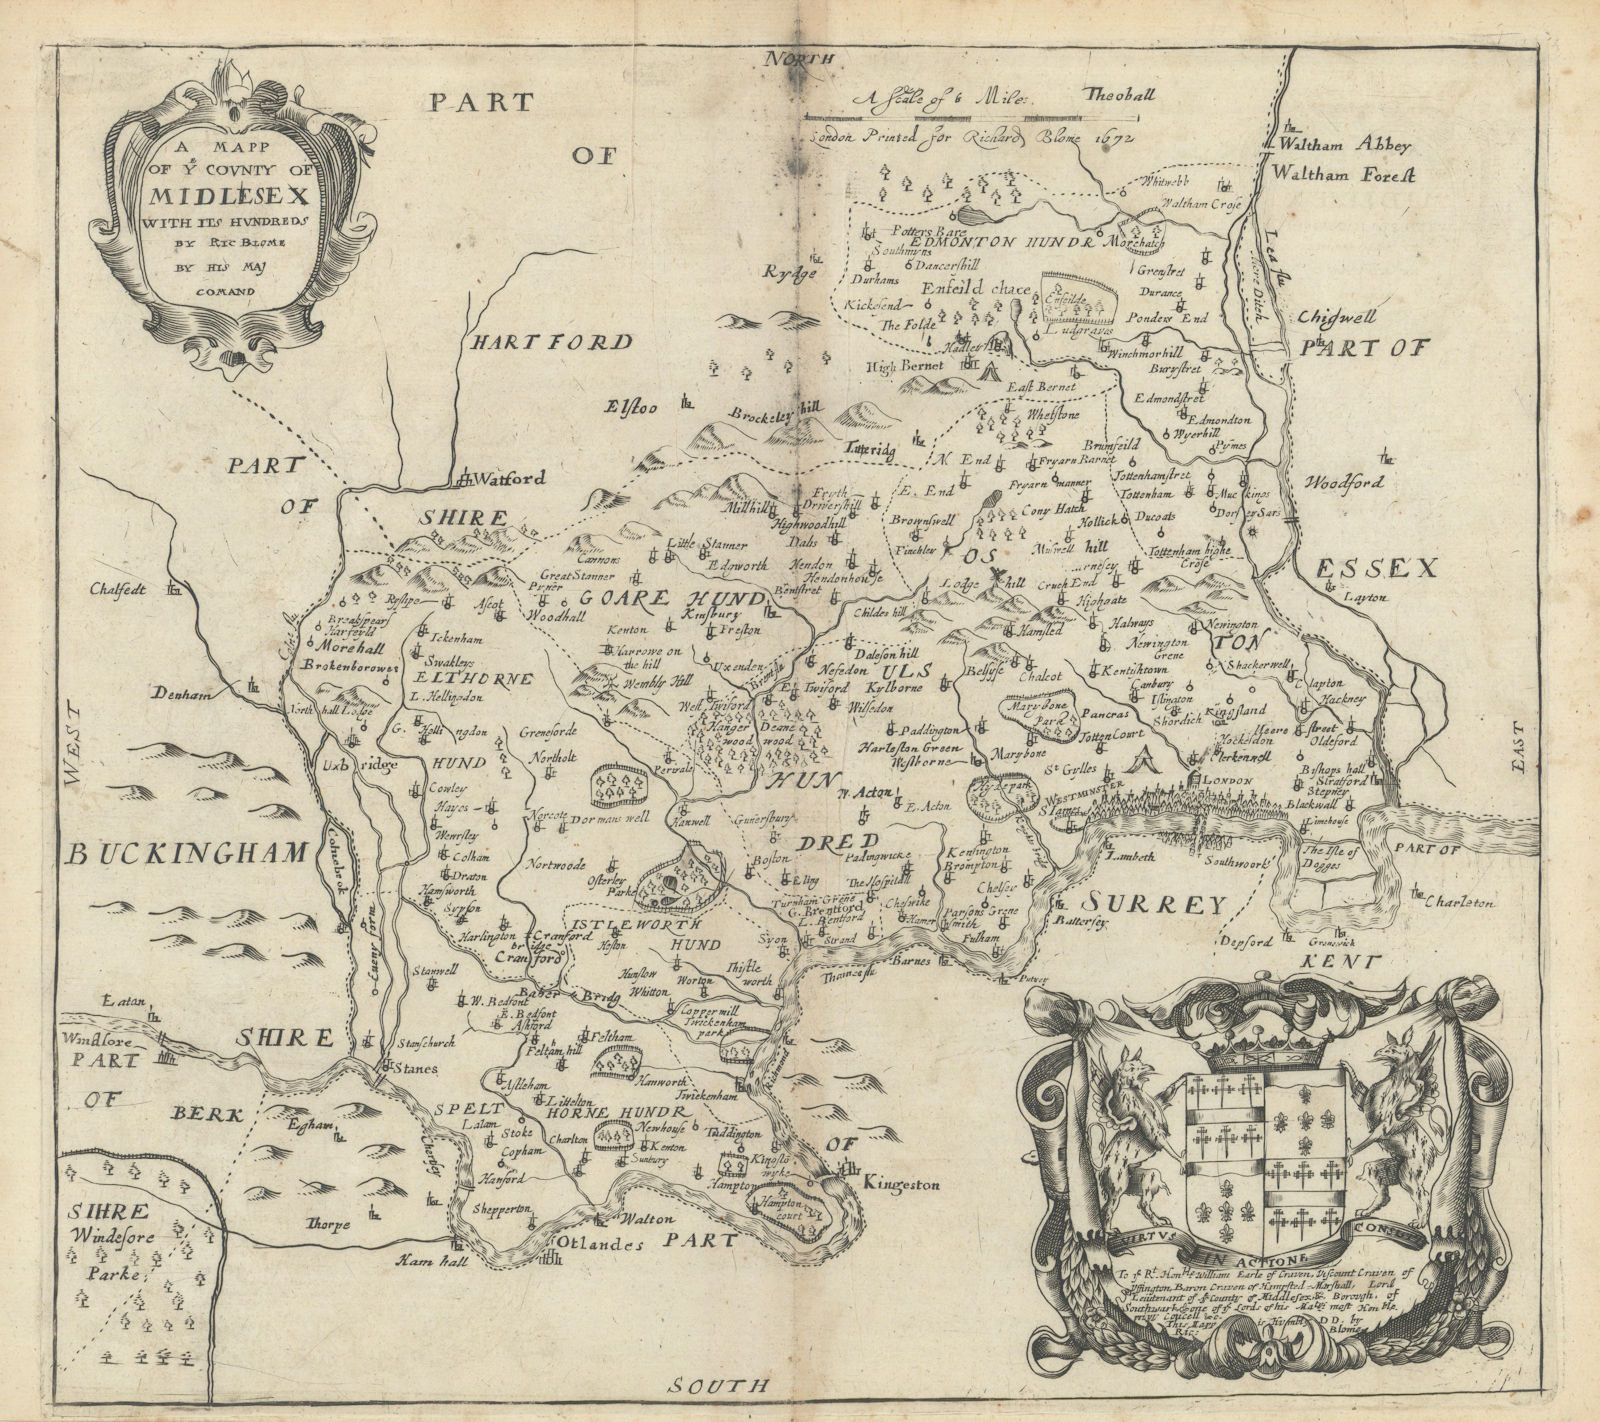 A Mapp of ye County of Midlesex with its Hundreds by Richard Blome 1673